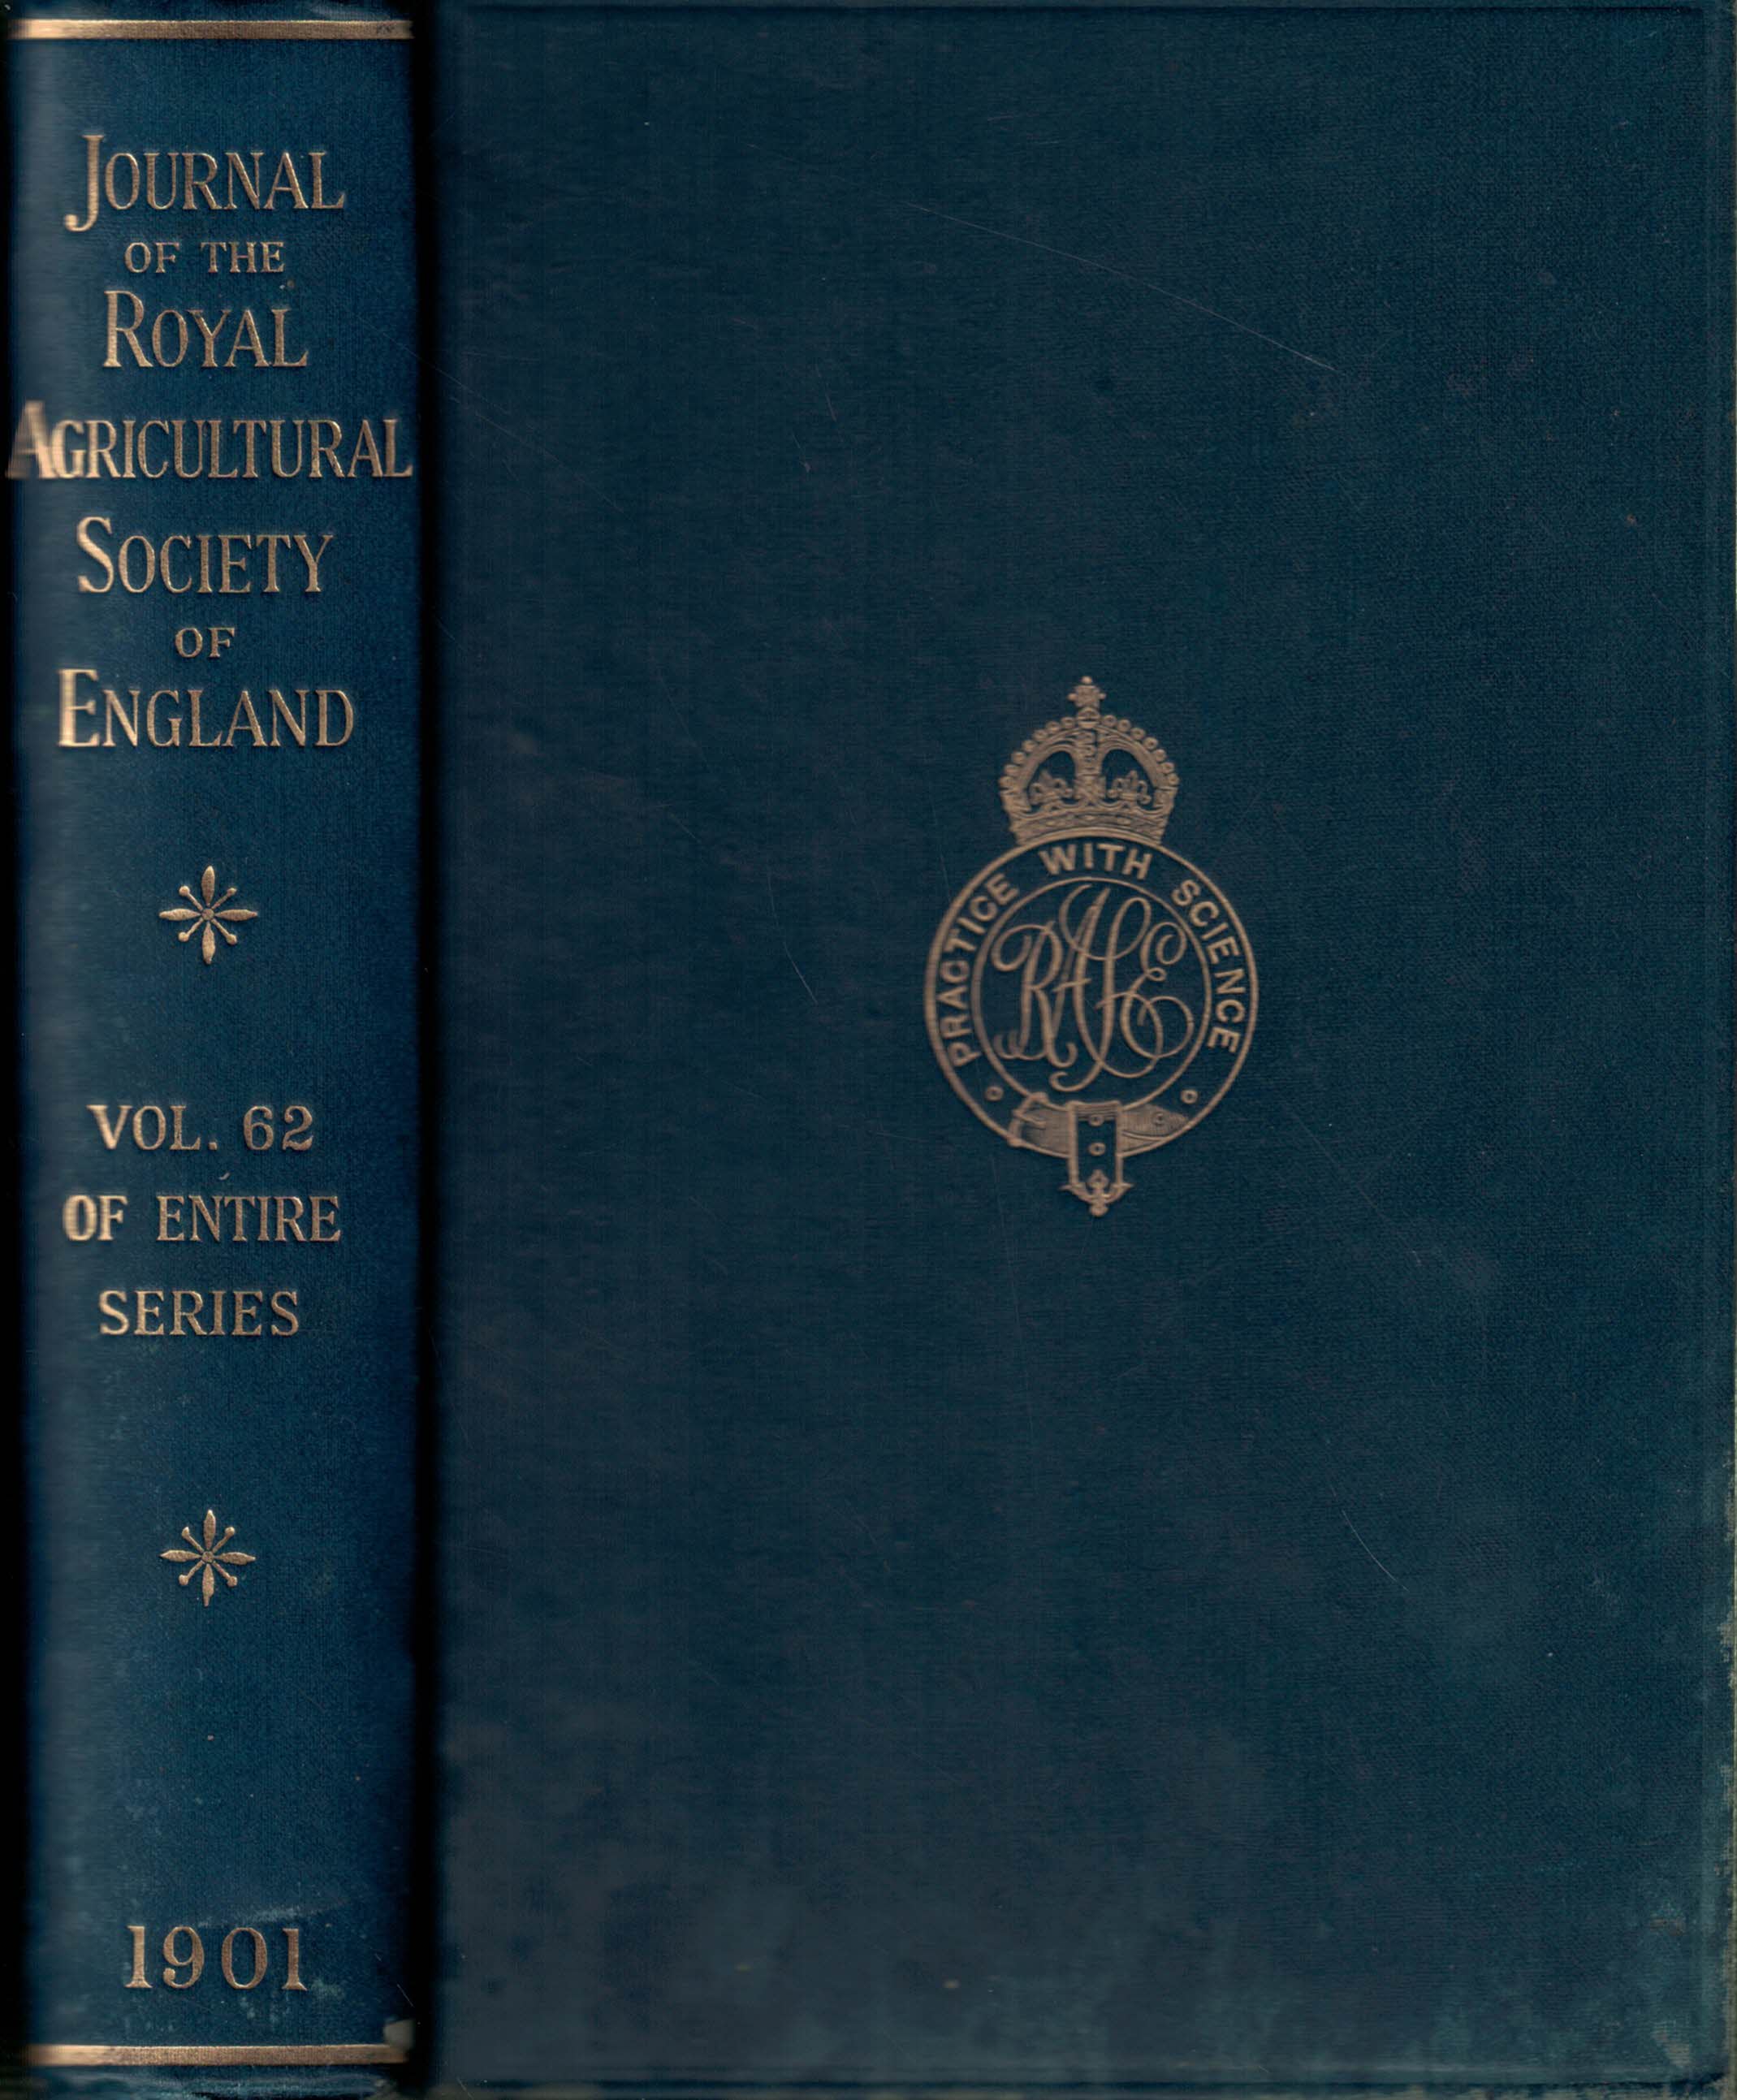 The Journal of the Royal Agricultural Society of England. Volume 62. 1901